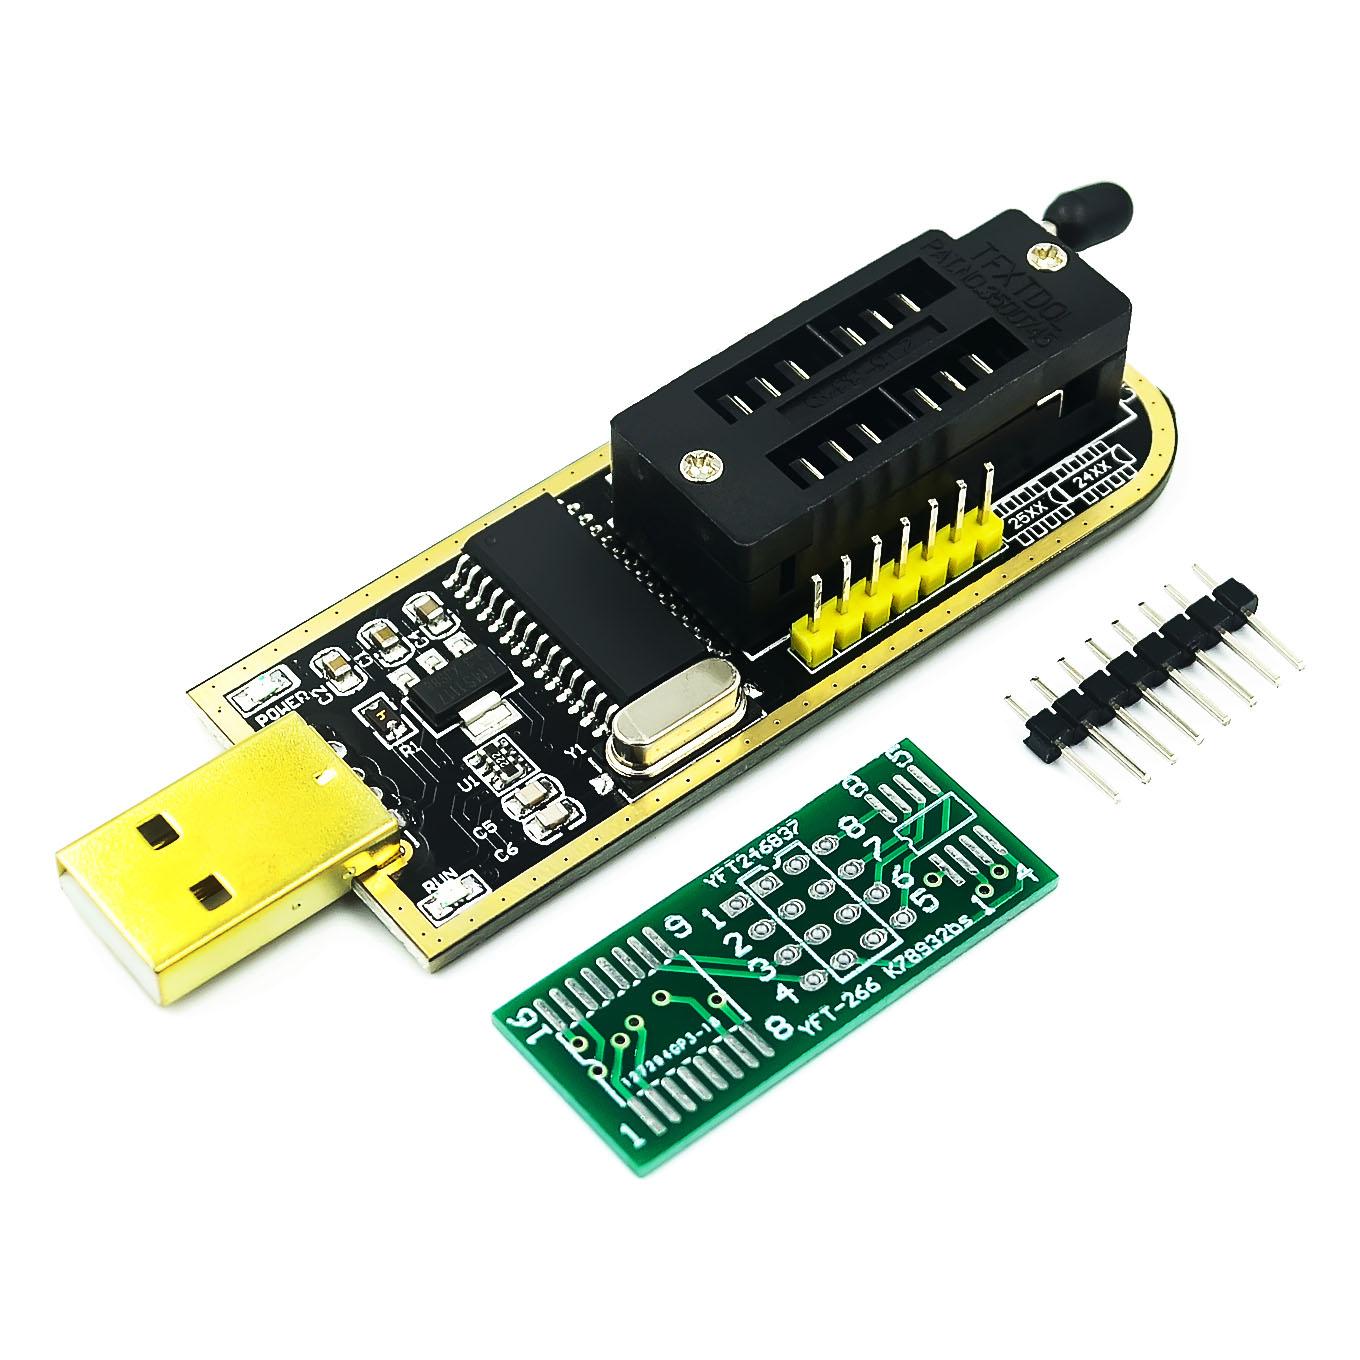 5pcs/lot CH341 24 25 Series EEPROM Flash BIOS USB Programmer with Software & Driver